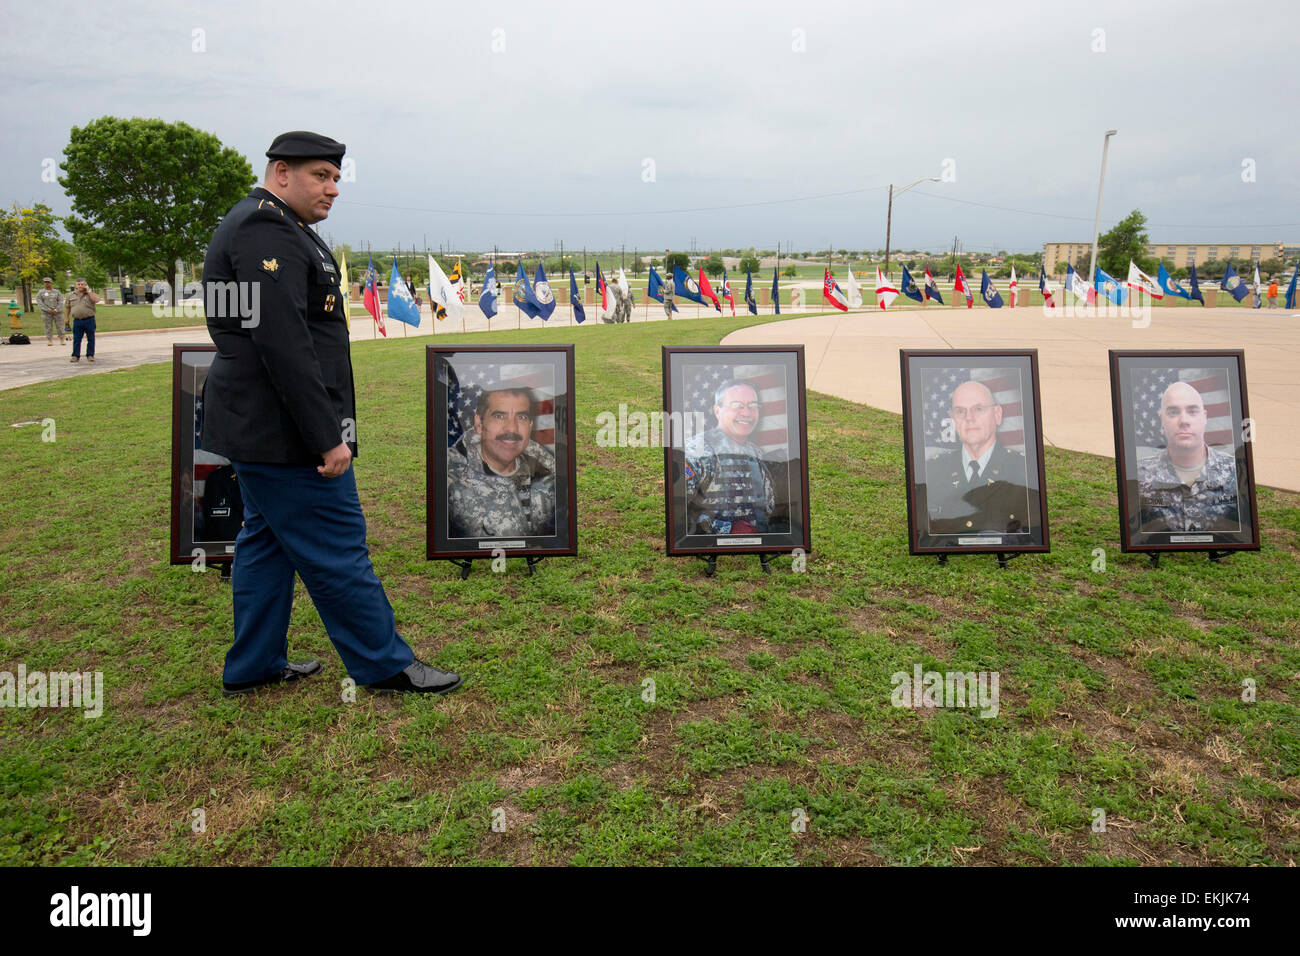 Soldier wounded in 2009 terrorist attack at Fort Hood TX stands before portraits of those killed in attack at memorial service Stock Photo